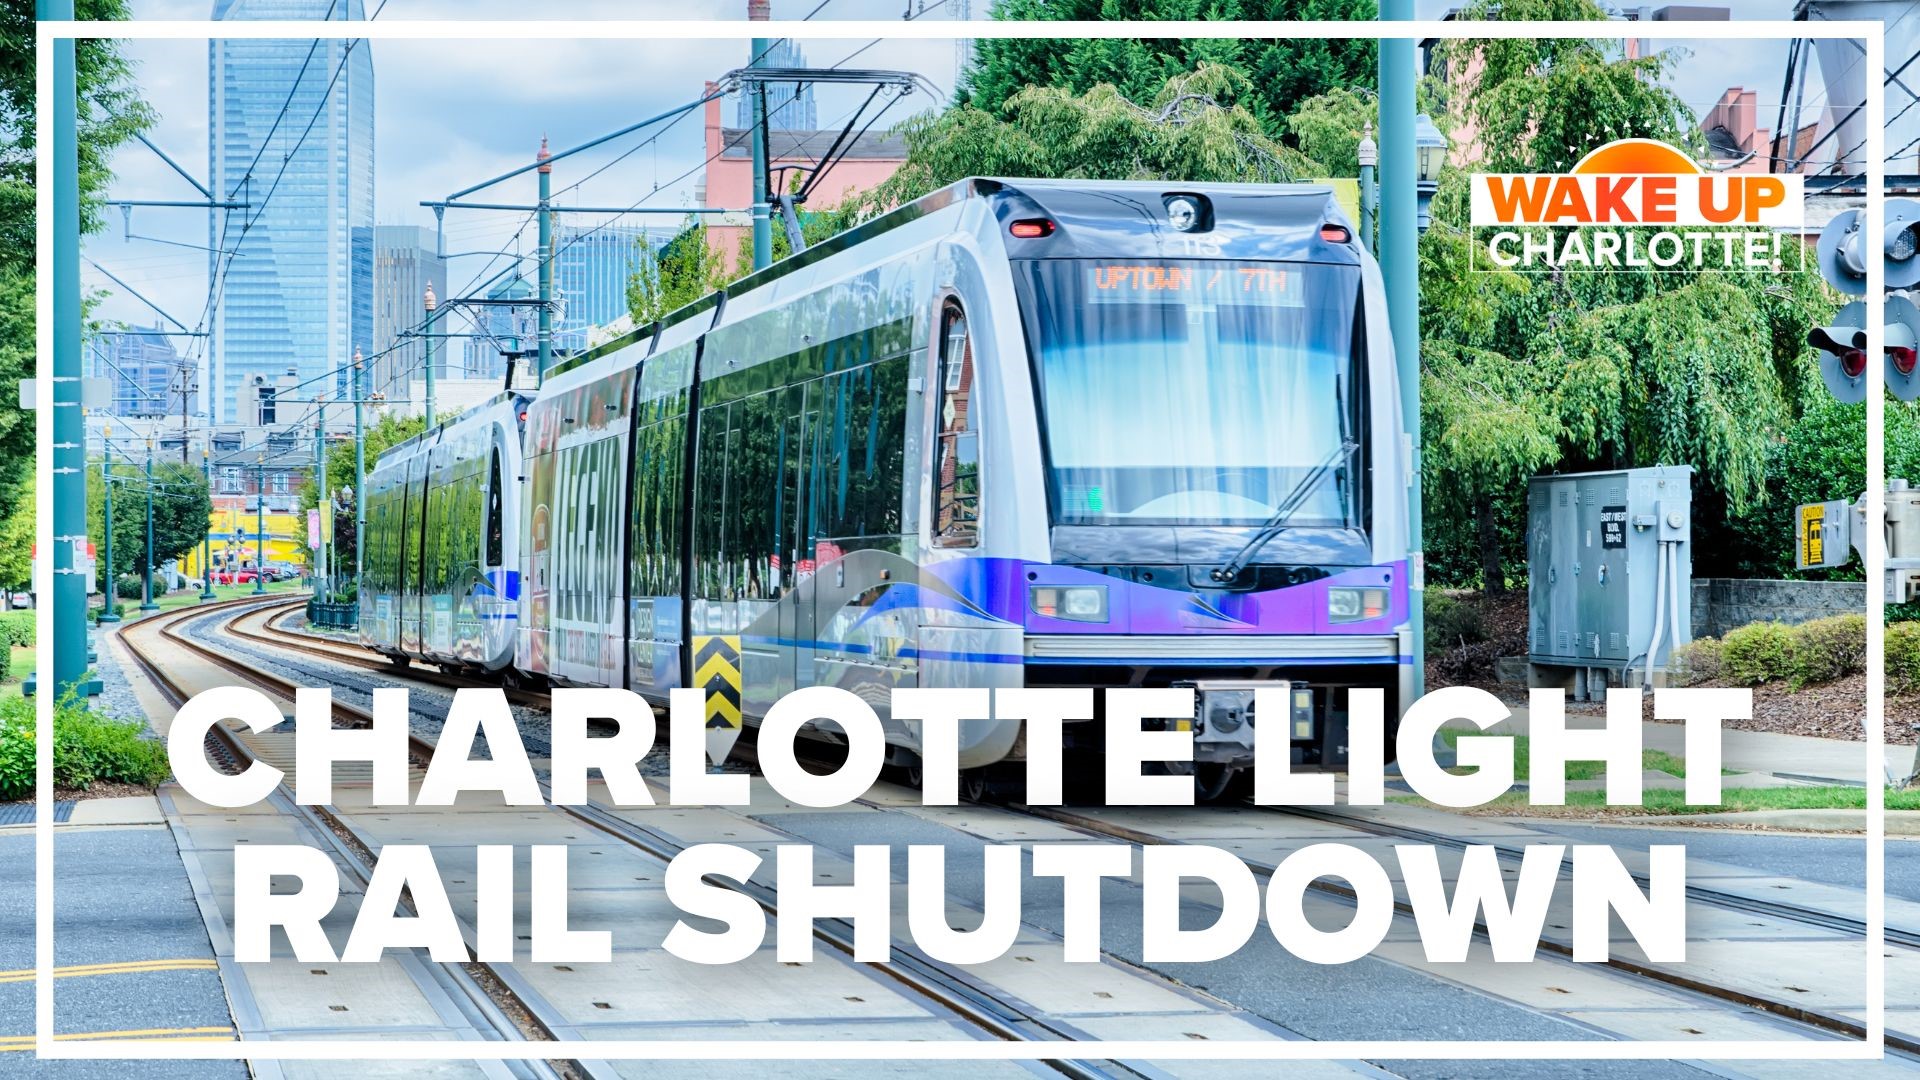 If you're thinking of taking the light rail or street car this weekend, CATS is suspending service to make routine upgrades it says will improve service.